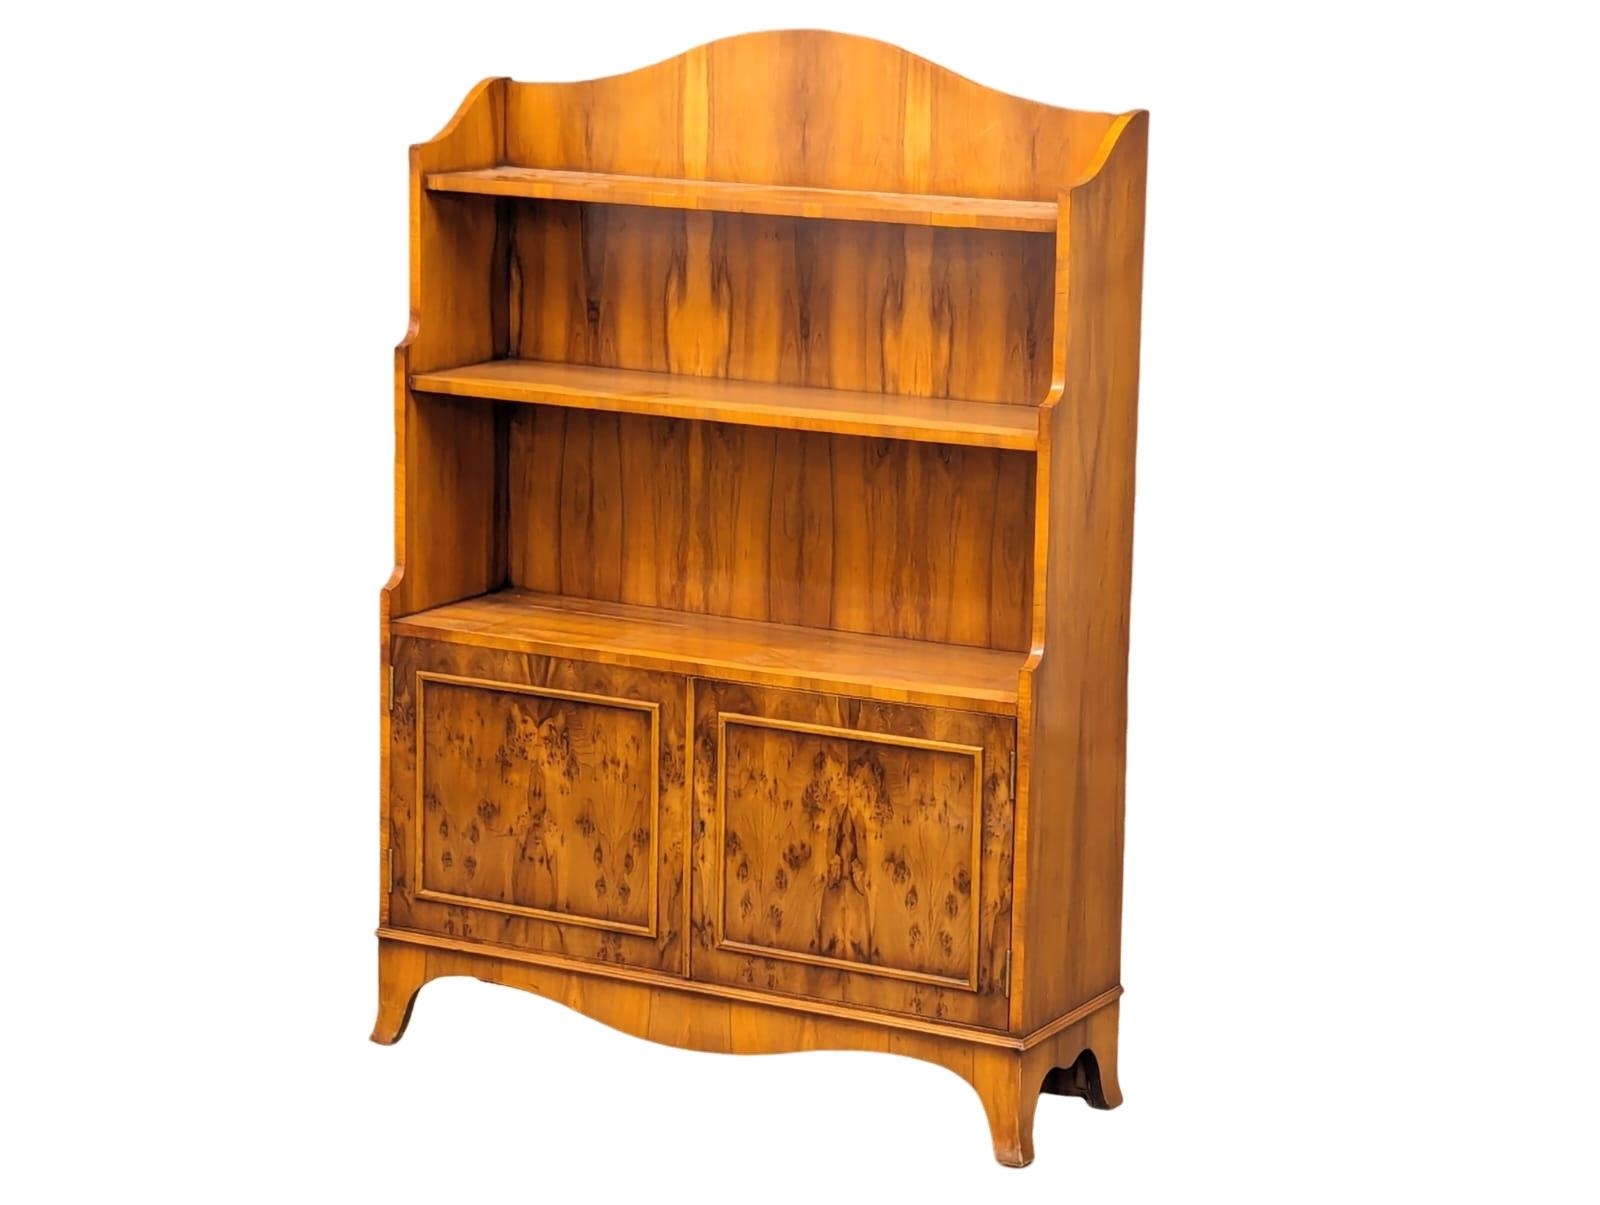 A yew wood open bookcase with 2 door cupboard. 84x26x120cm